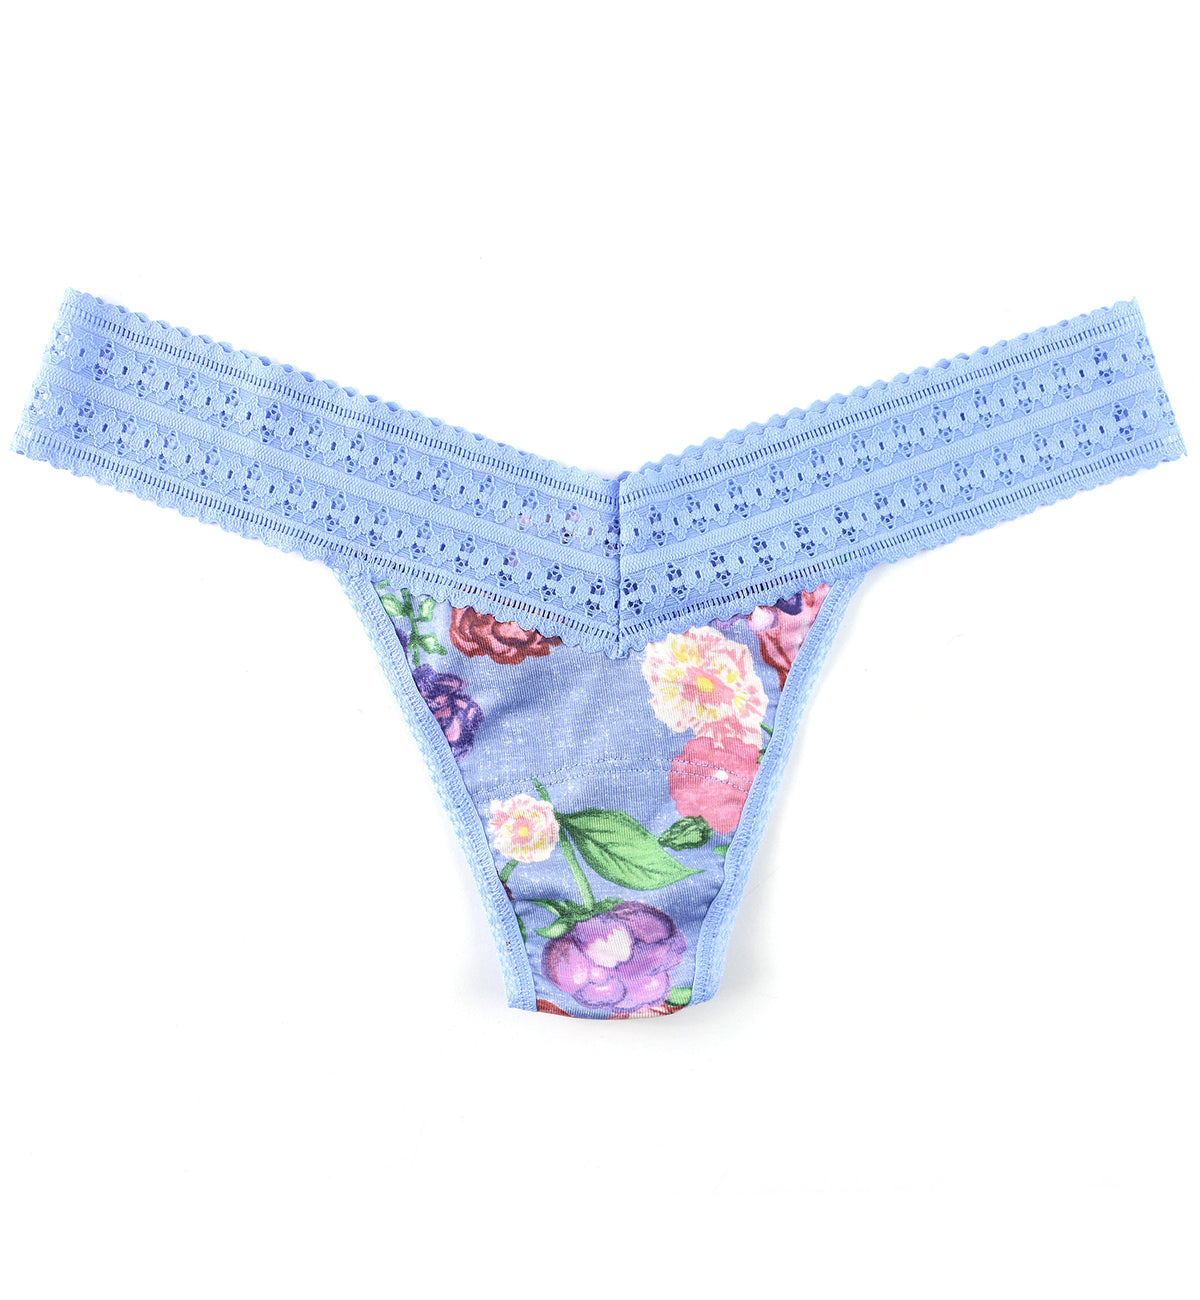 Hanky Panky Printed DreamEase Low Rise Thong (PR681004),Chatsworth House - Chatsworth House,One Size